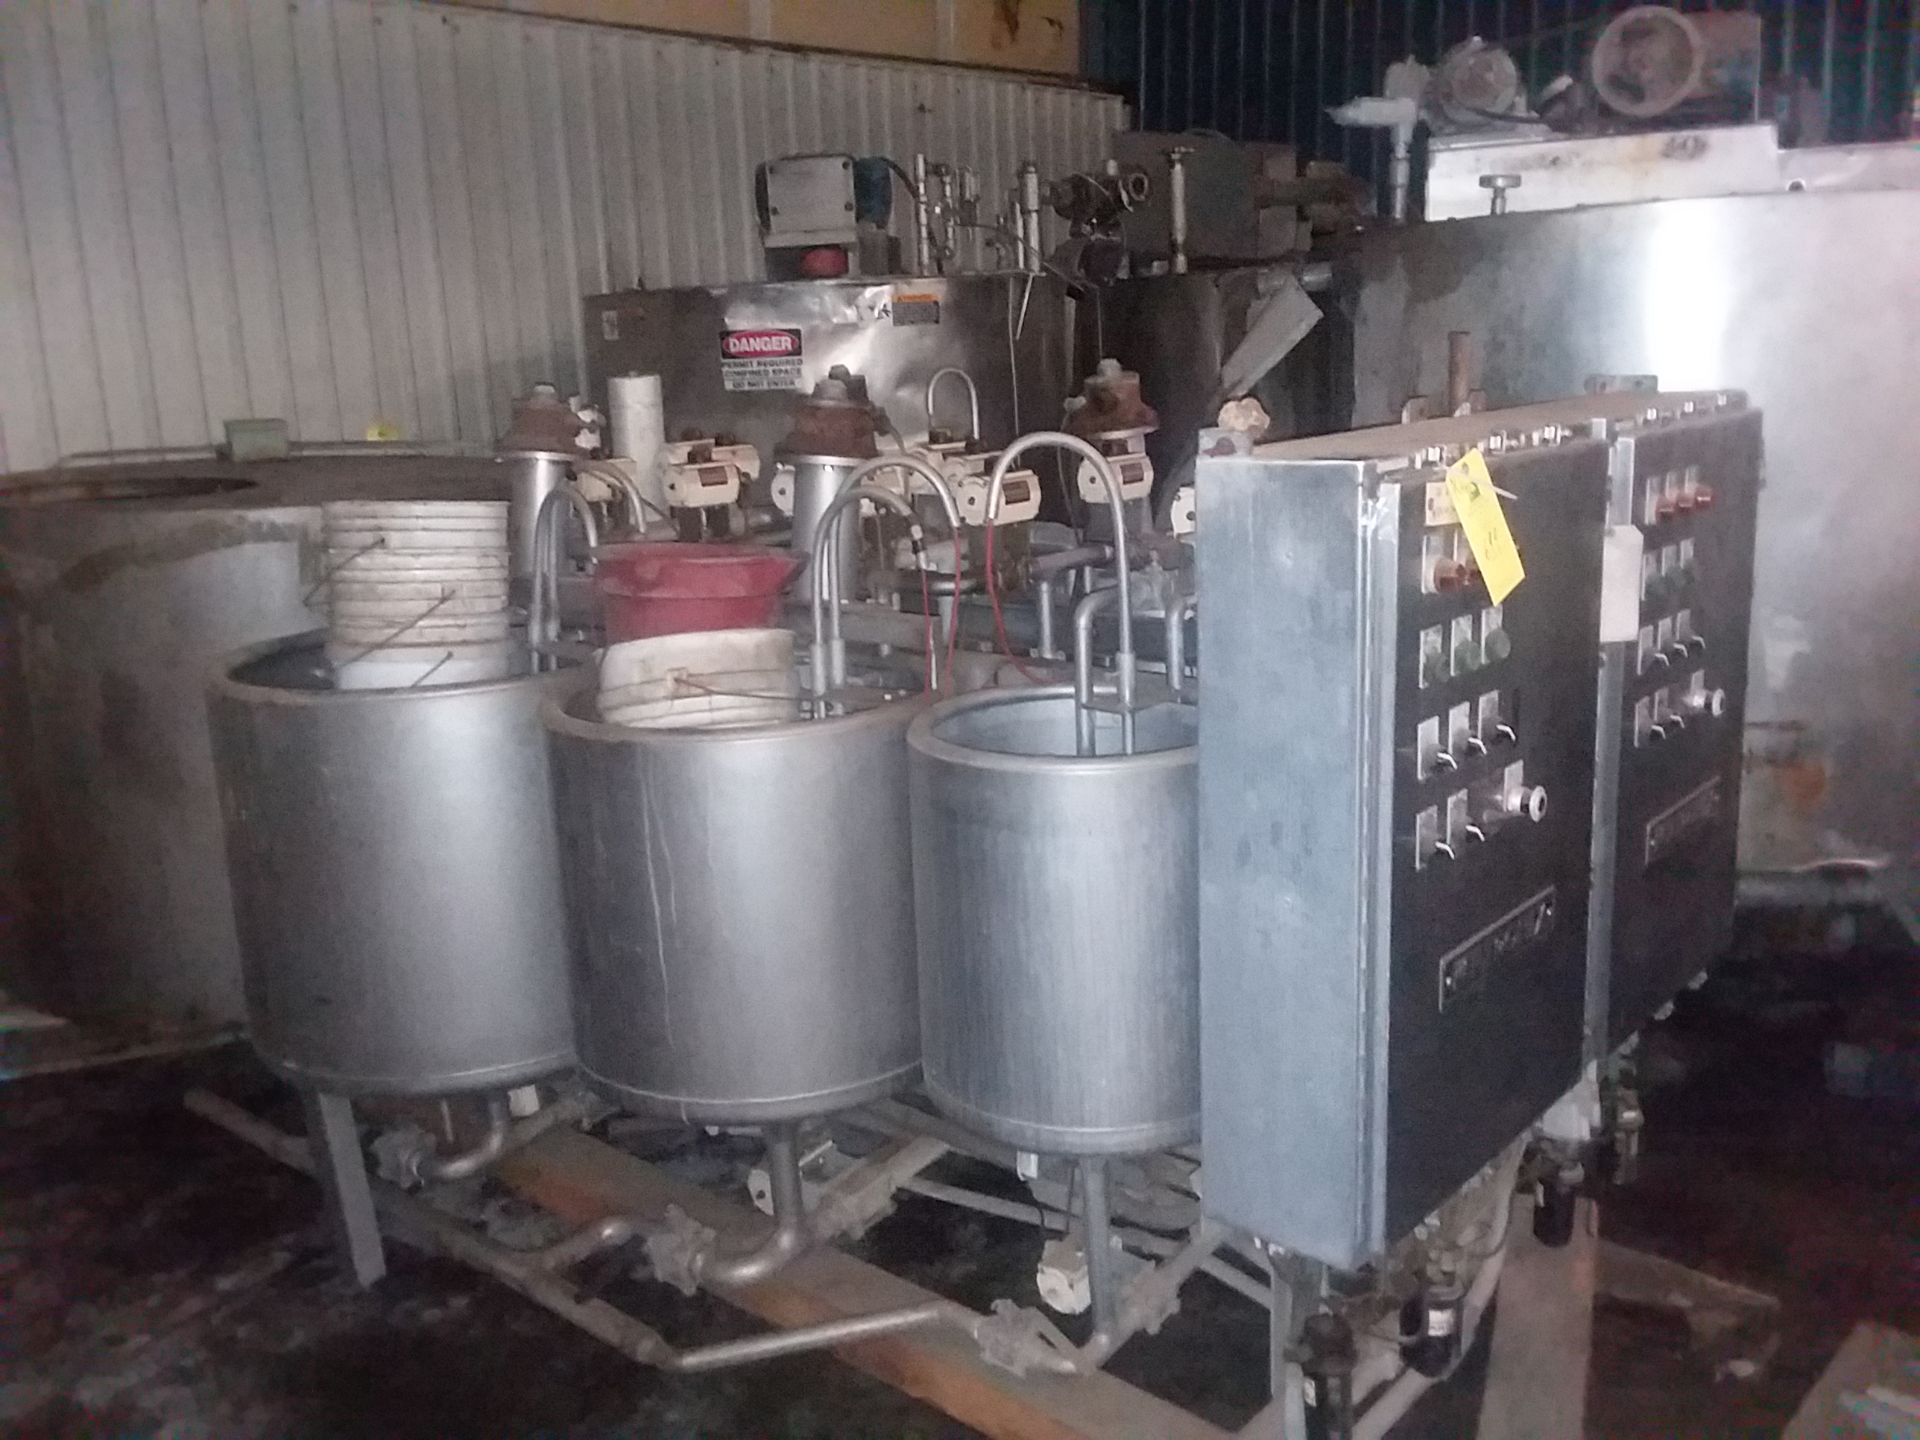 Keltronix Chemical Mixing System w/ (6) Stainless Steel Tanks: 30 inches Diameter, 26.5 inches Heigh